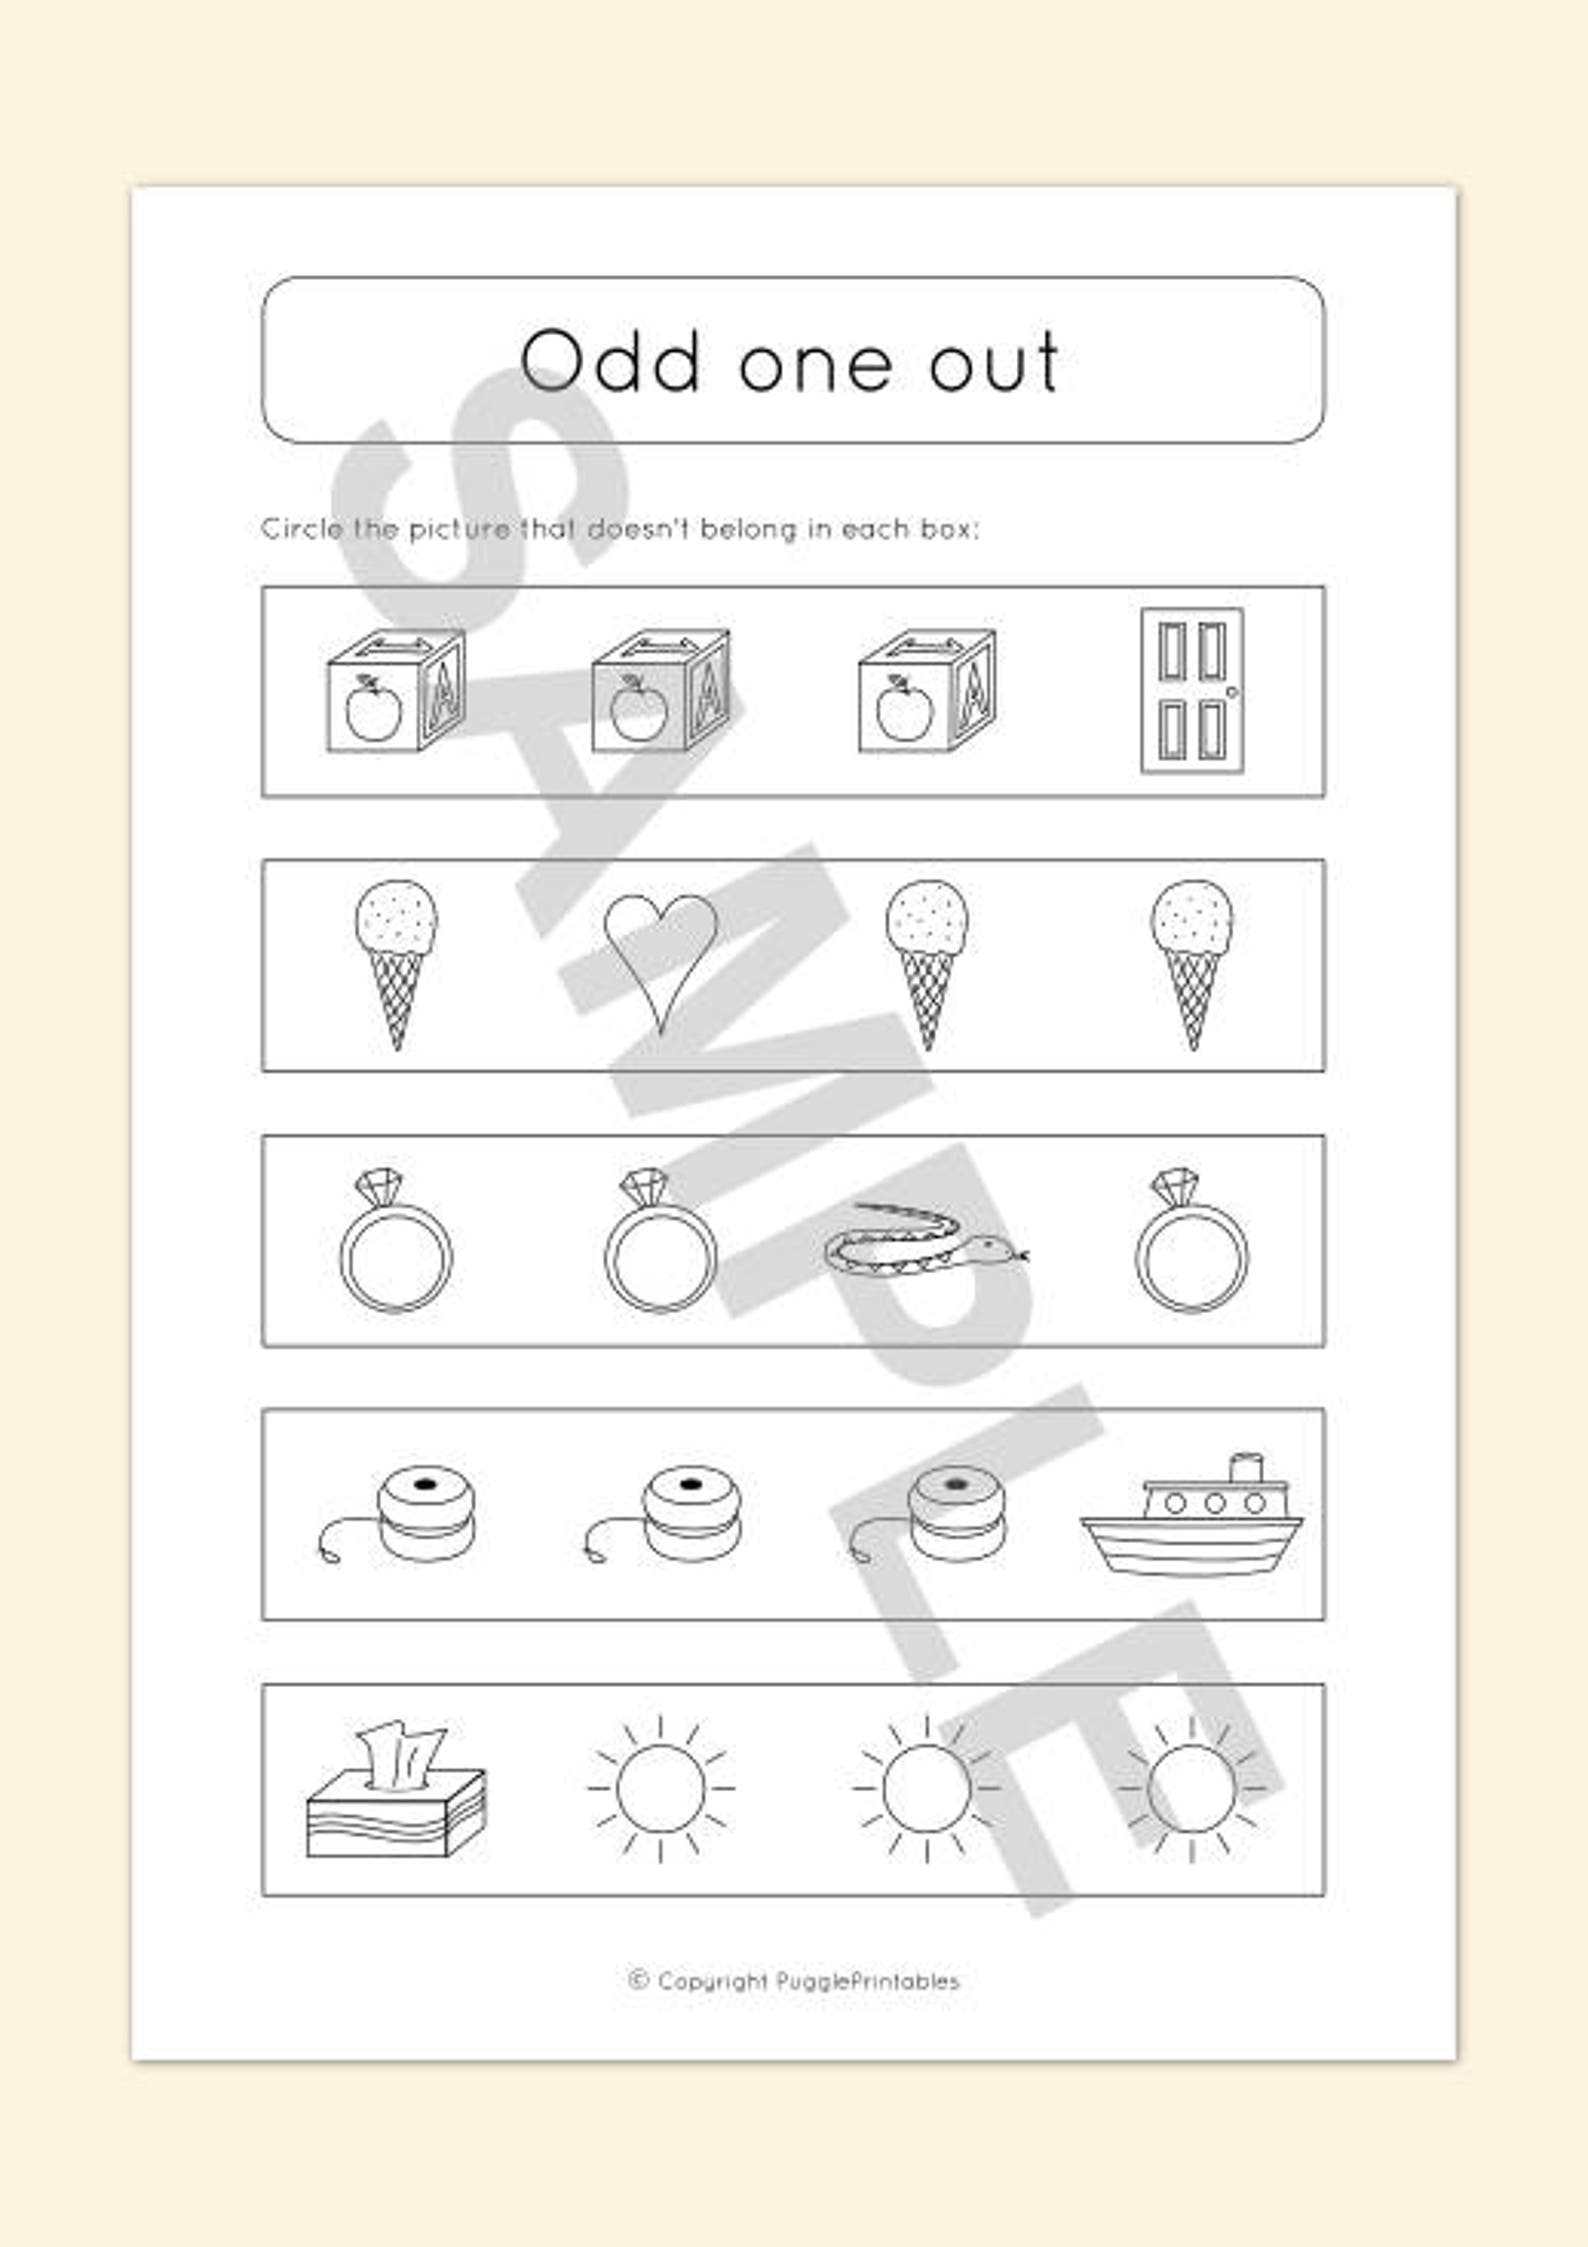 printable-odd-one-out-activity-worksheet-for-kids-download-etsy